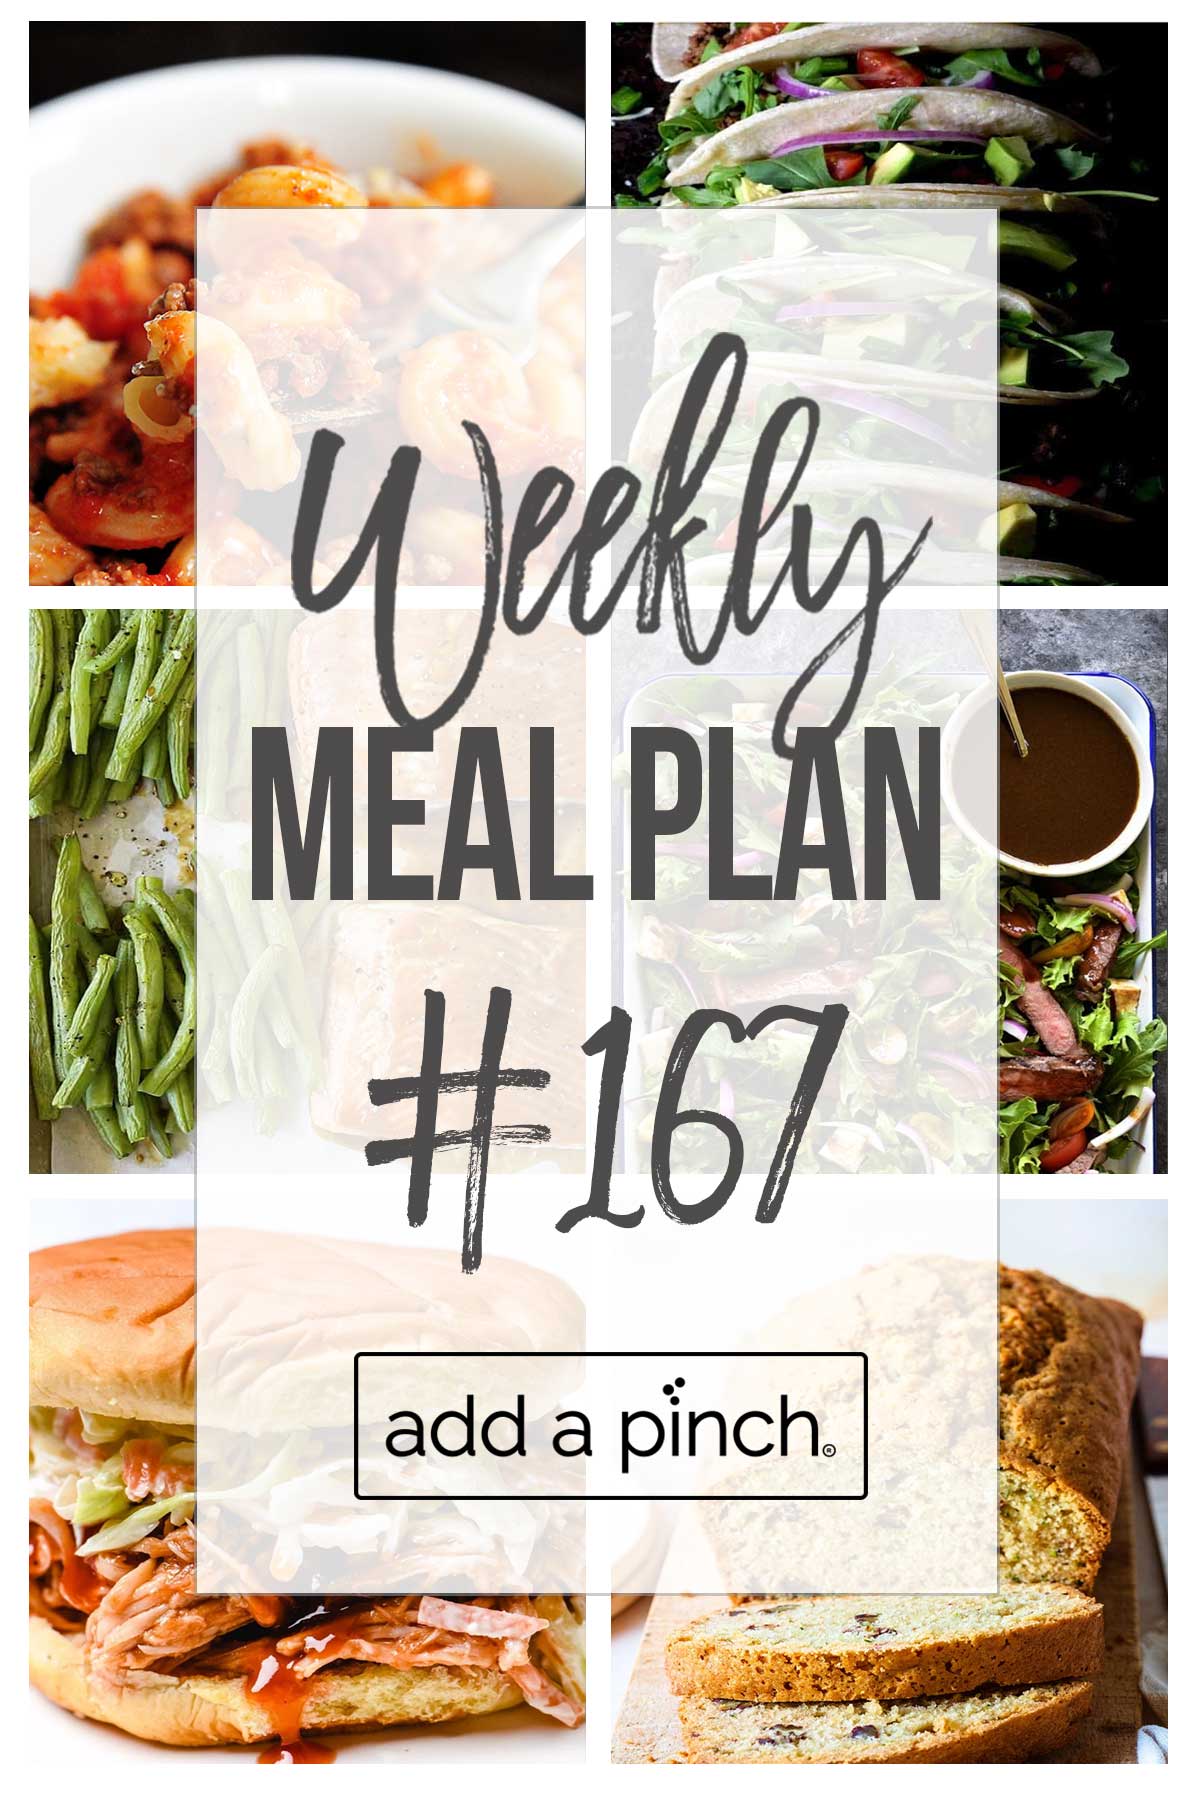 Add a Pinch Free Weekly Meal Plan #167 graphic of recipes images and meal plan weekly number.